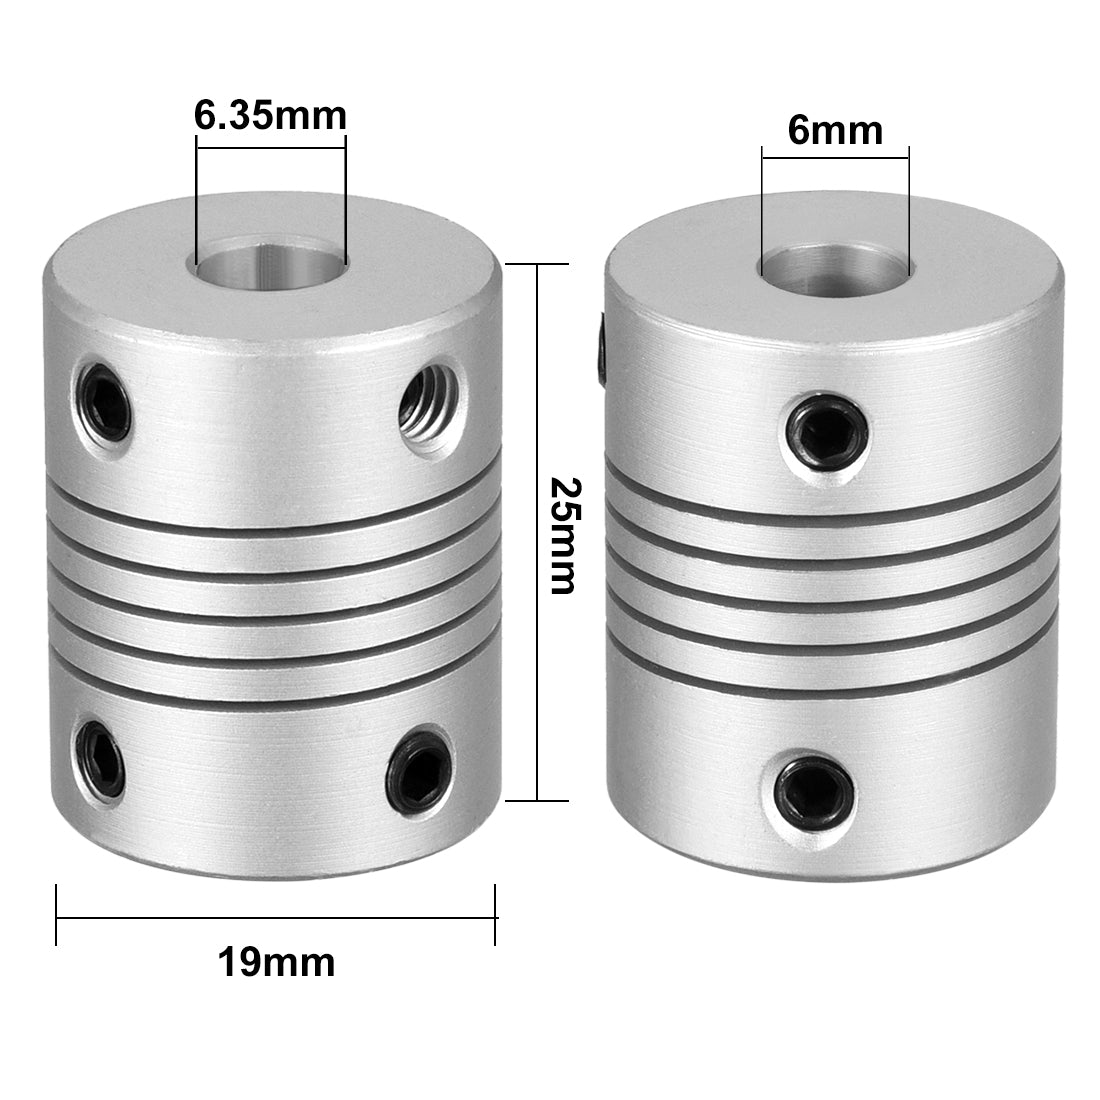 uxcell Uxcell 6mm to 6.35mm Aluminum Alloy Shaft Coupling Flexible Coupler Motor Connector Joint L25xD19 Silver